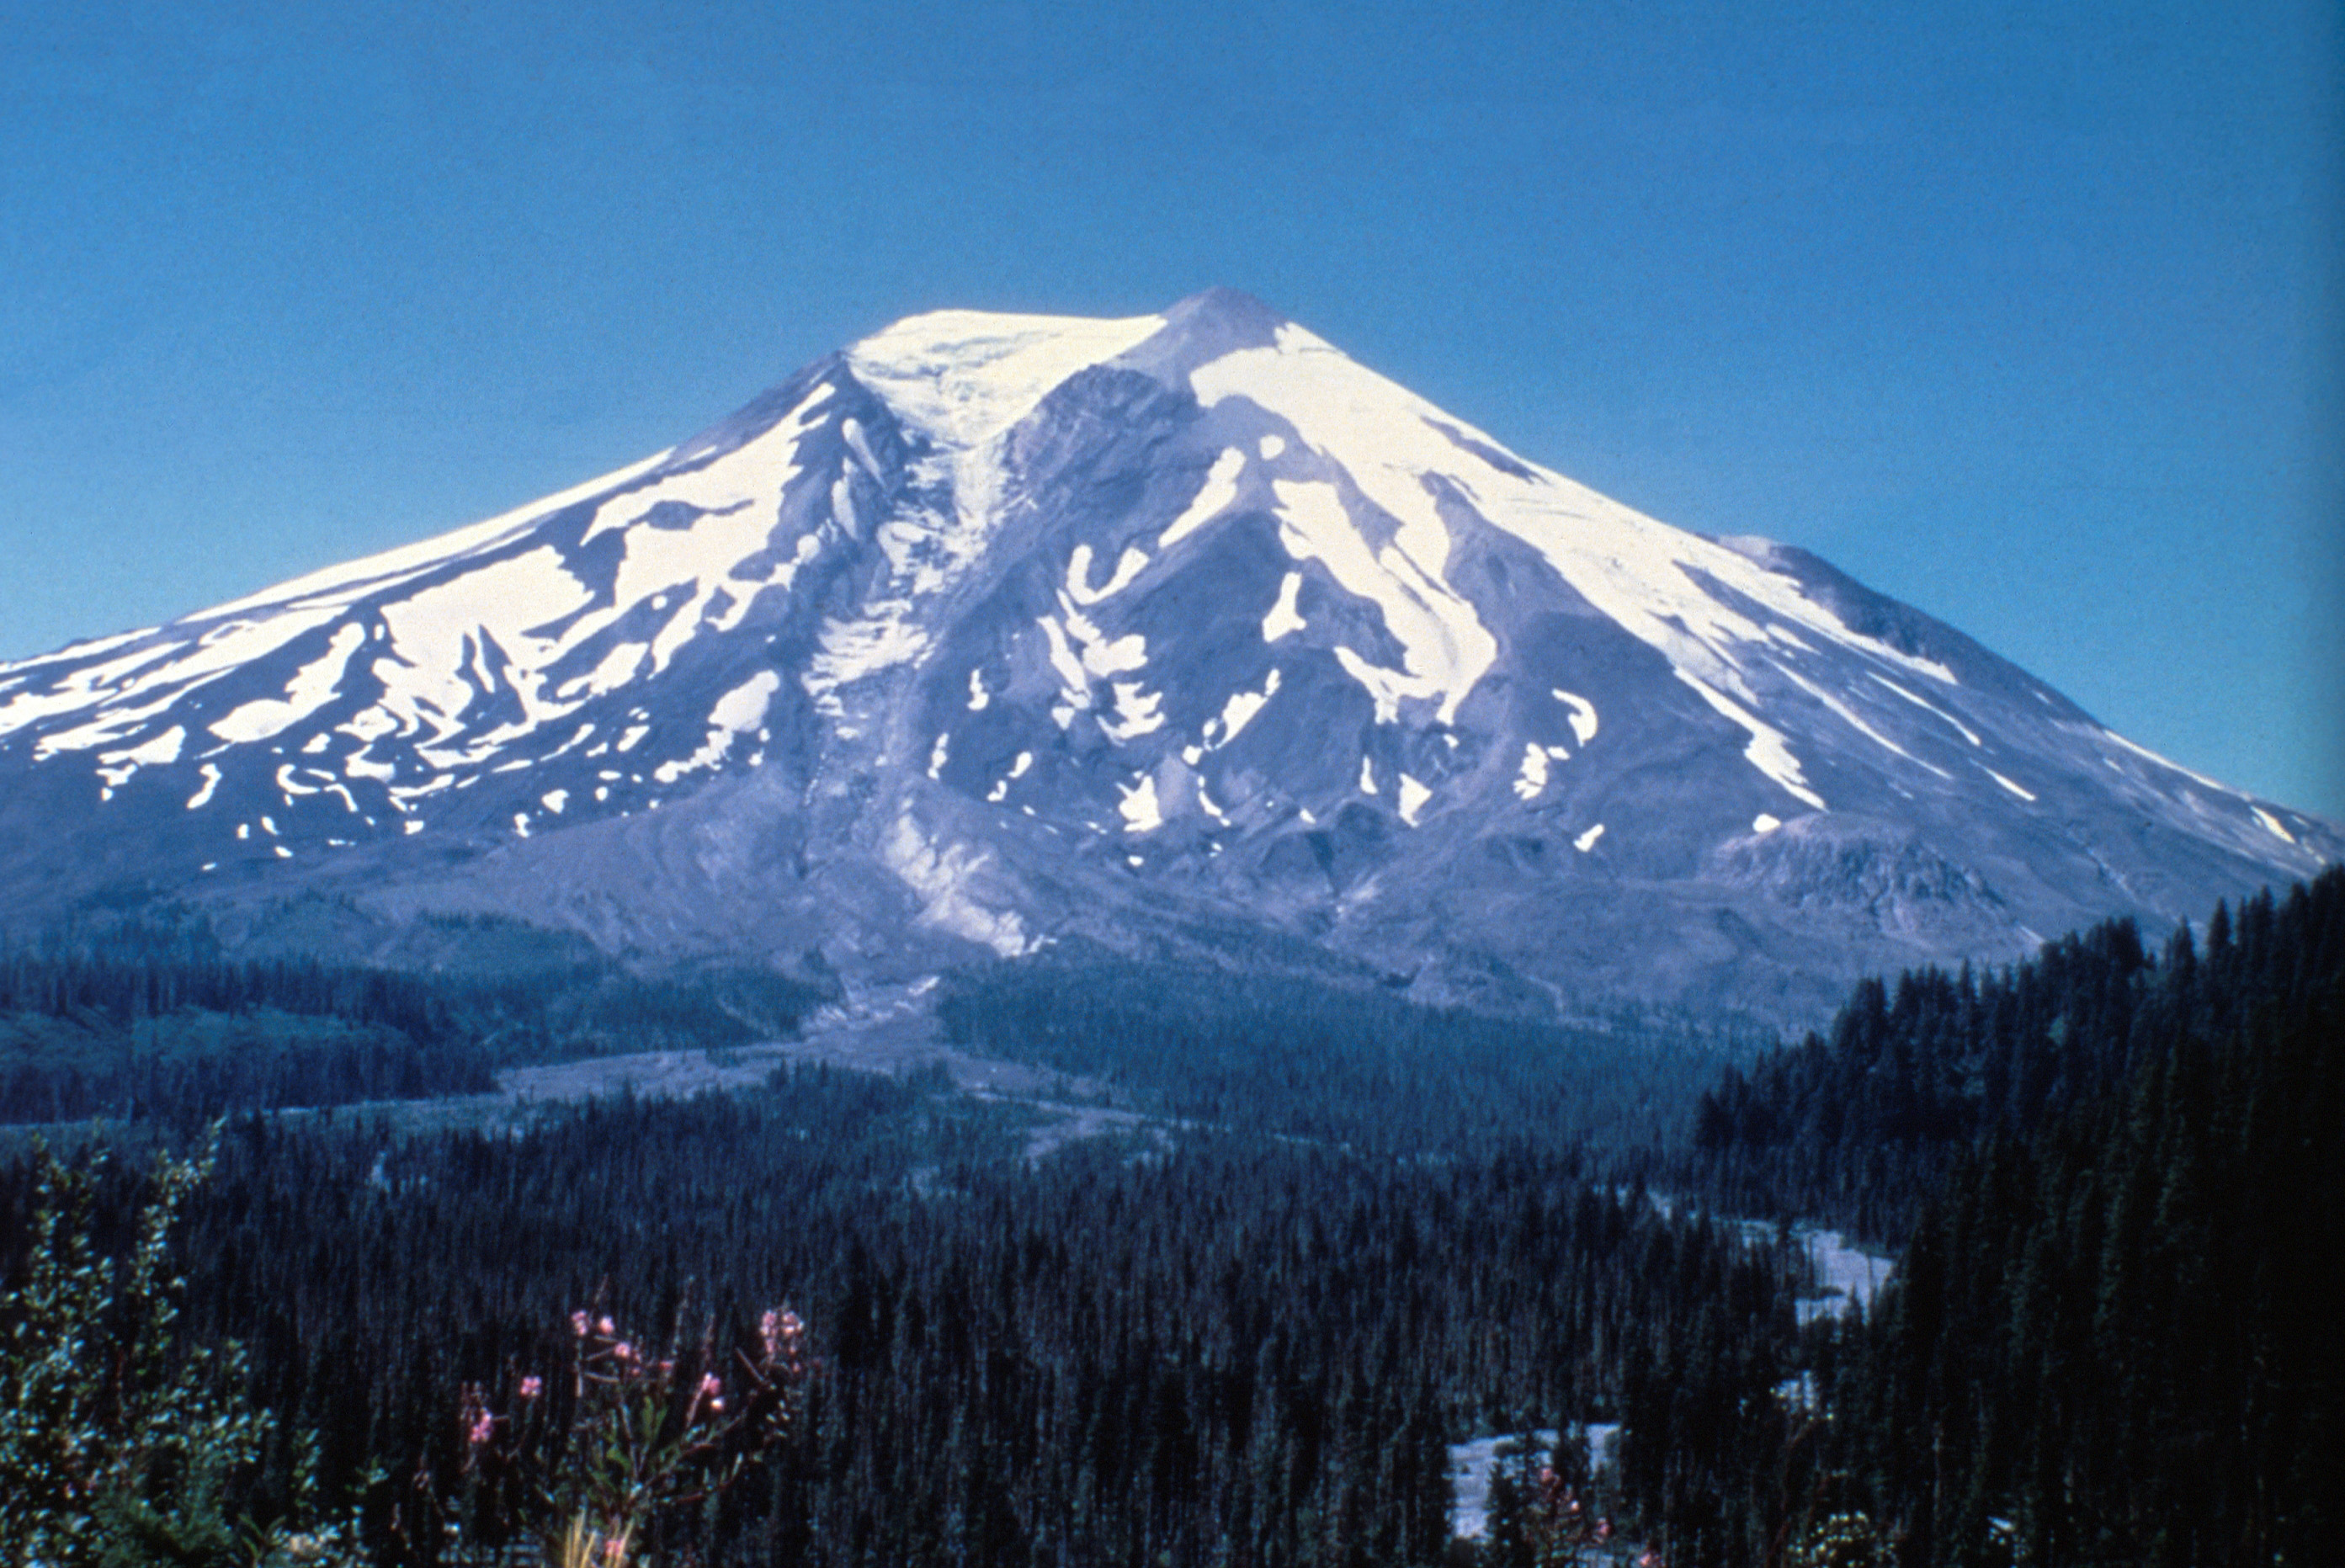 Southeast side of Mount St. Helens, showing Shoestring Glacier. This pre-1980 view of Mount St. Helens shows the volcano's southeast flank and the headwaters of the Muddy River before the May 18th, 1980 eruption. The broad forested area in the foreground is underlain by many layers of volcanic deposits, chiefly lahars and pyroclastic flows generated from past eruptions of Mount St. Helens. (Science Source/USGS—Getty Images/Science Source)